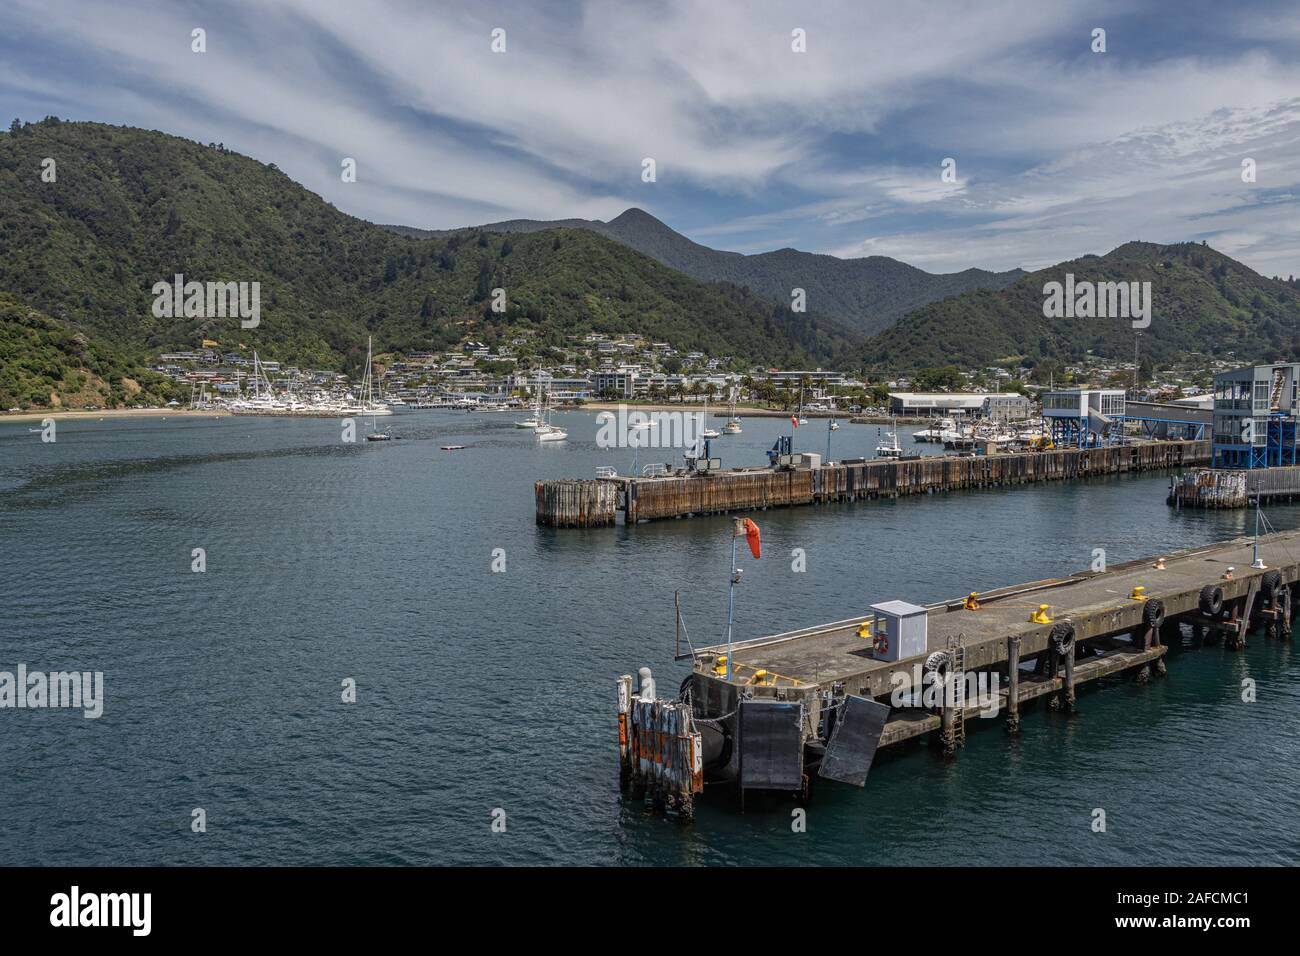 View of Picton from deck of ferry Stock Photo